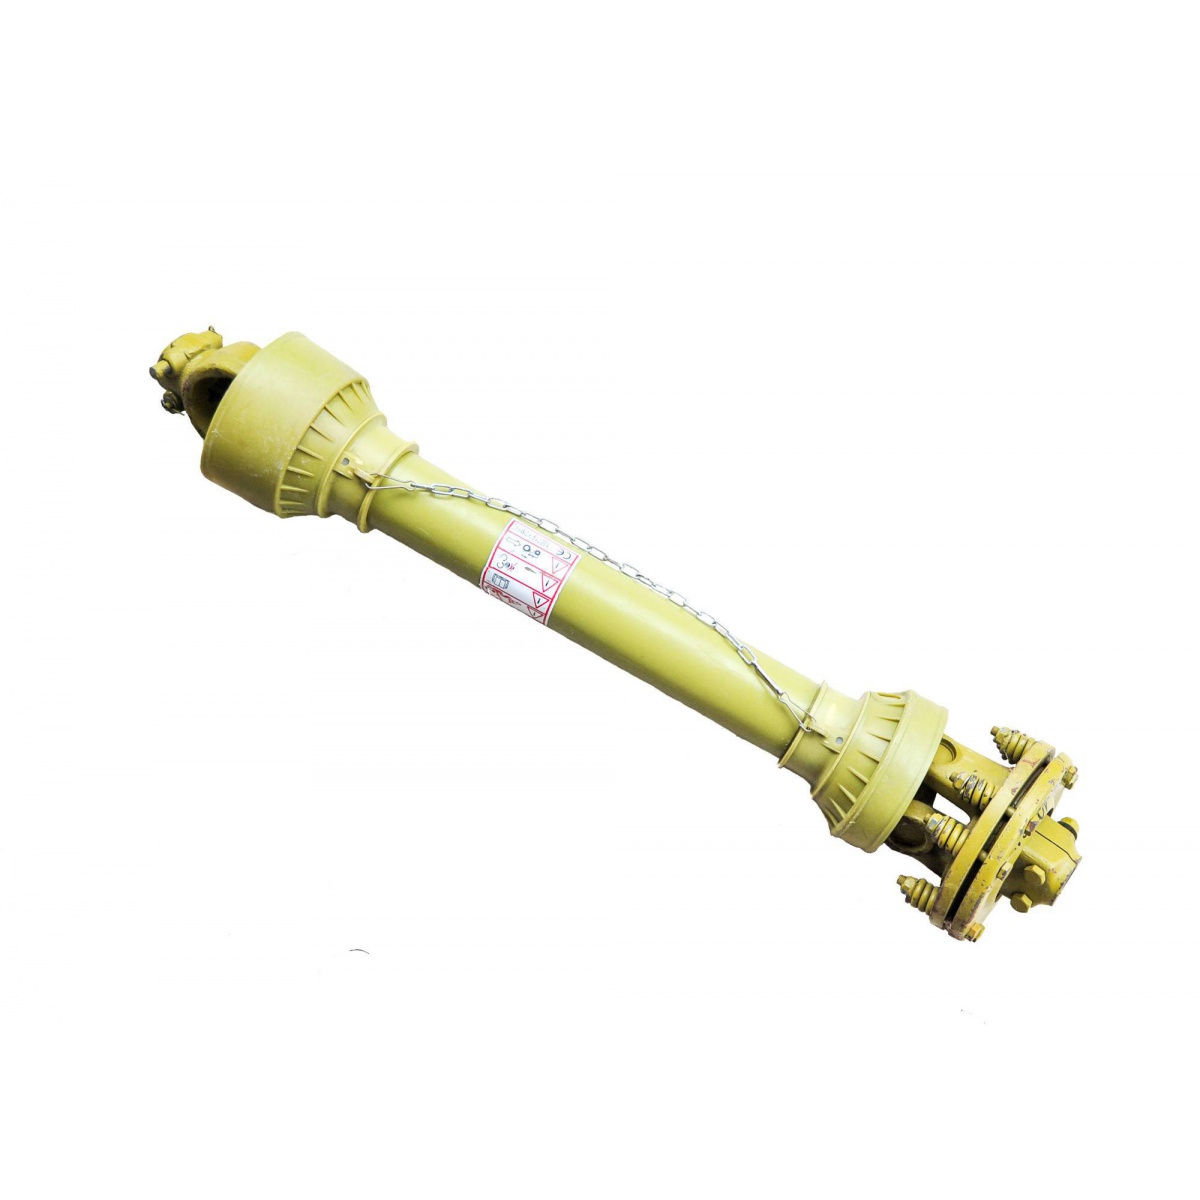 PTO shaft with clutch 07B - 120 cm / up to 105 HP